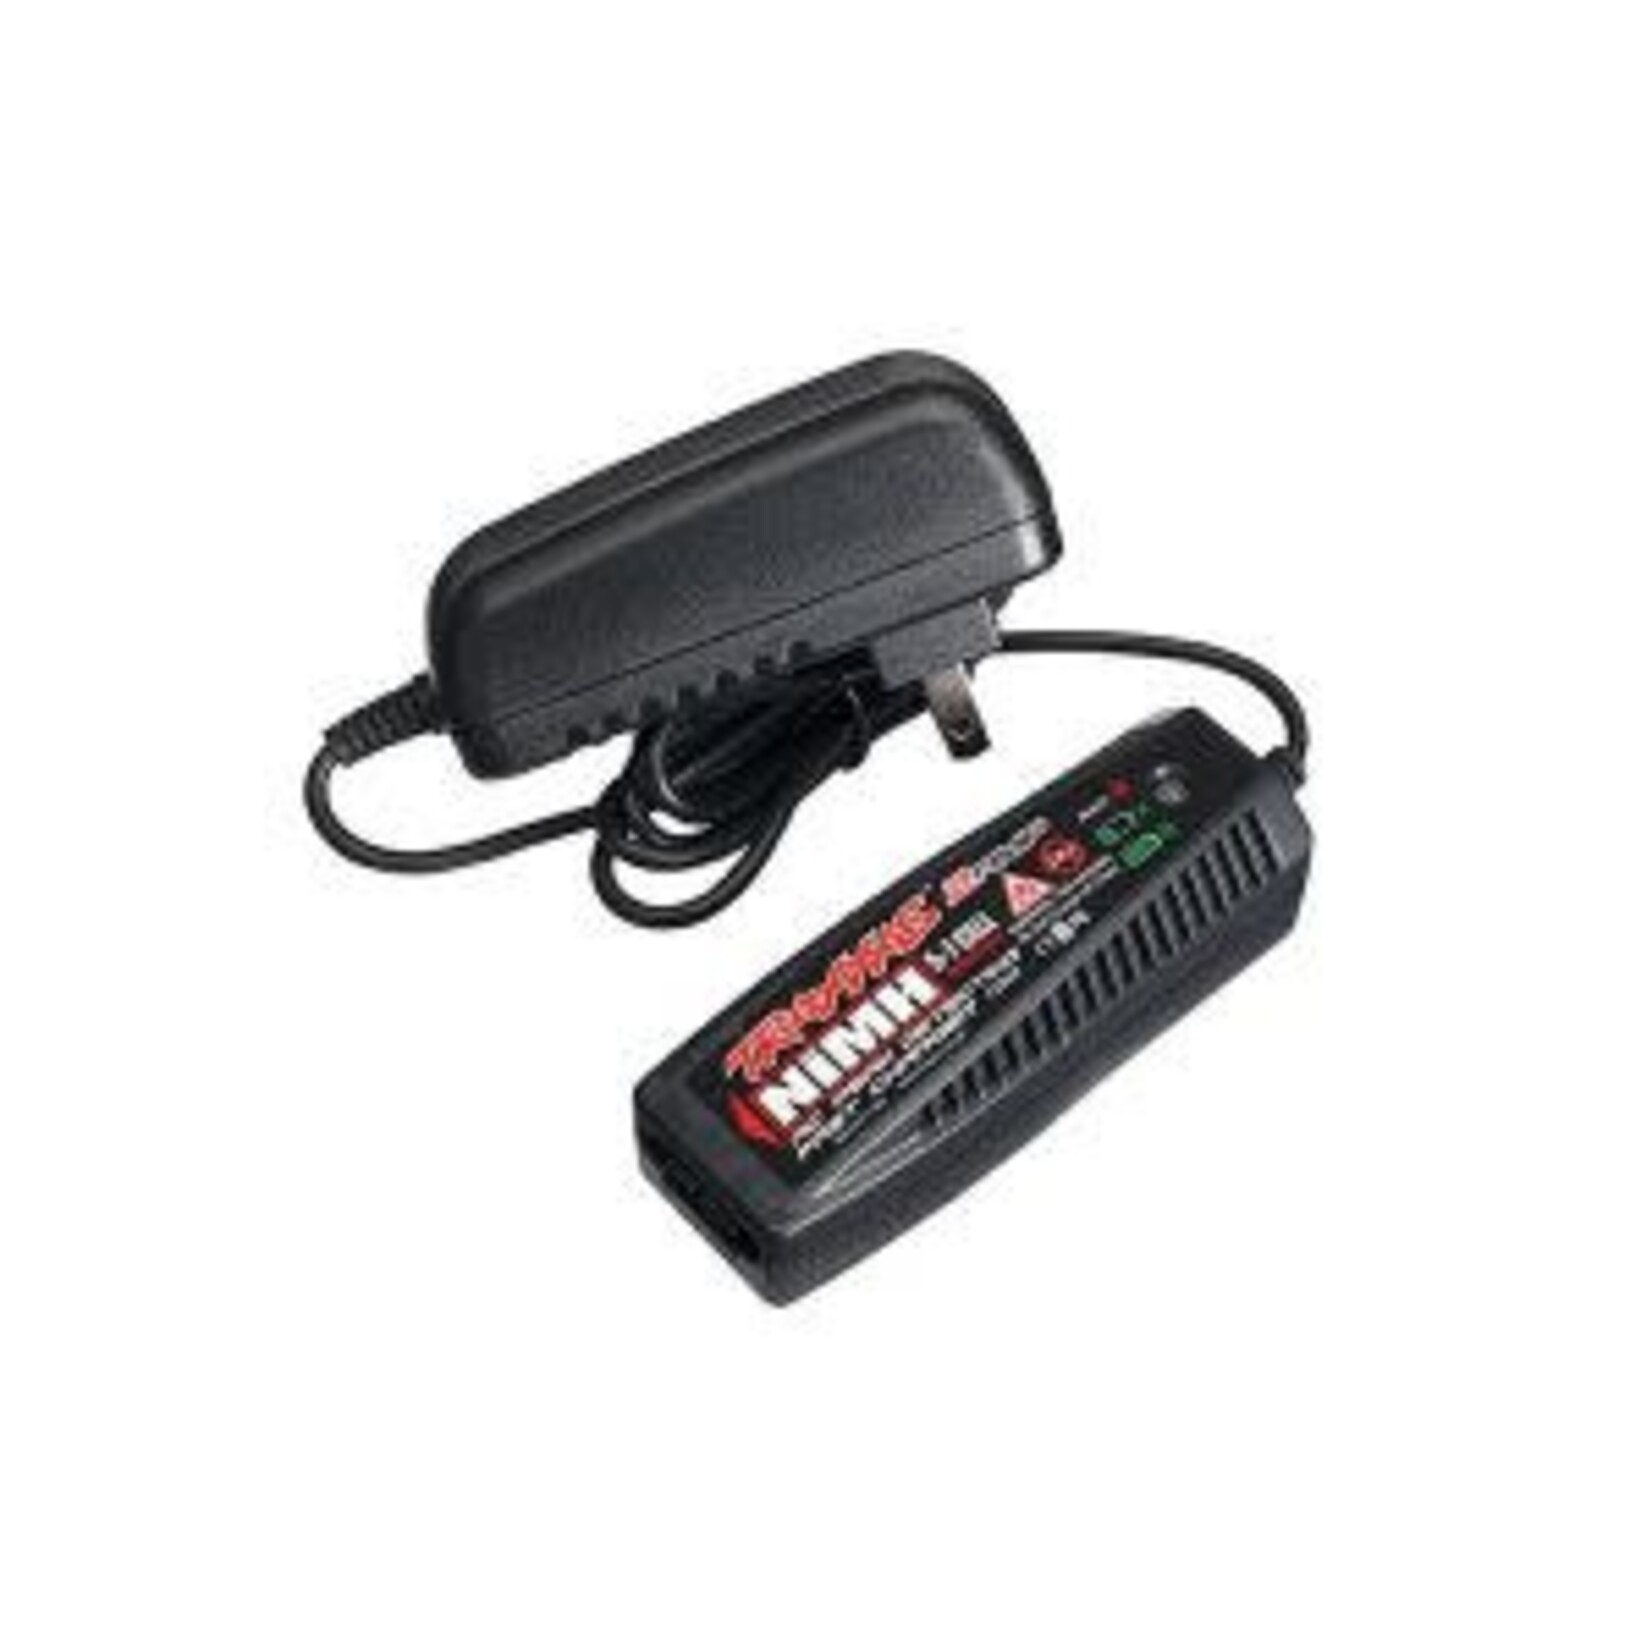 Traxxas 2969 Charger, AC, 2 amp NiMH peak detecting (5-7 cell, 6.0-8.4 volt, NiMH only)